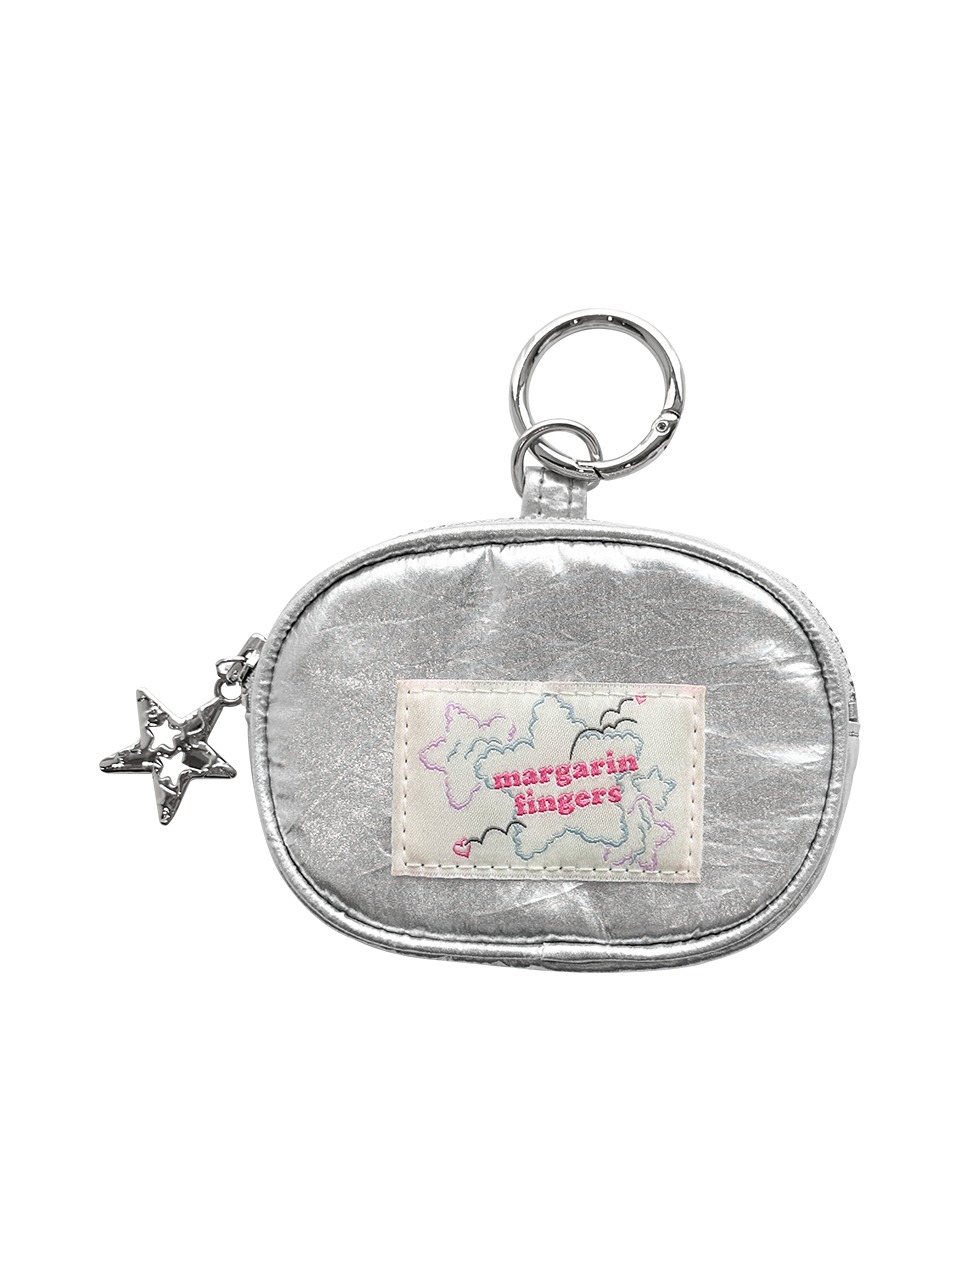 STAR KEYRING POUCH (SILVER)